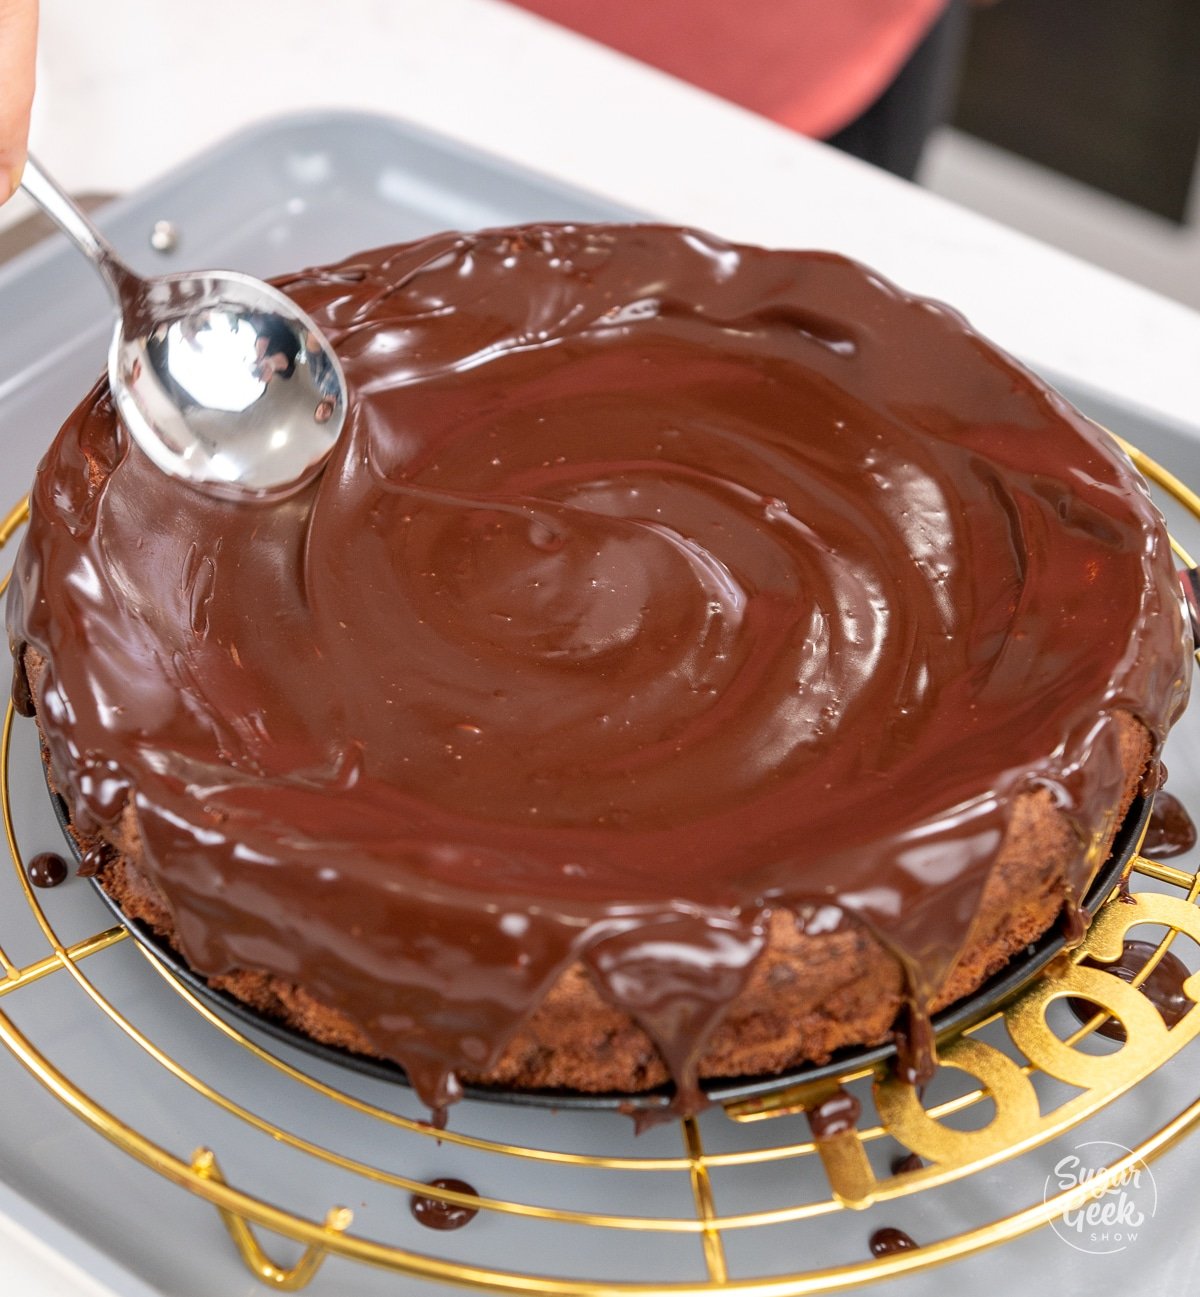 spoon smoothing out chocolate ganache on top of a flourless chocolate cake